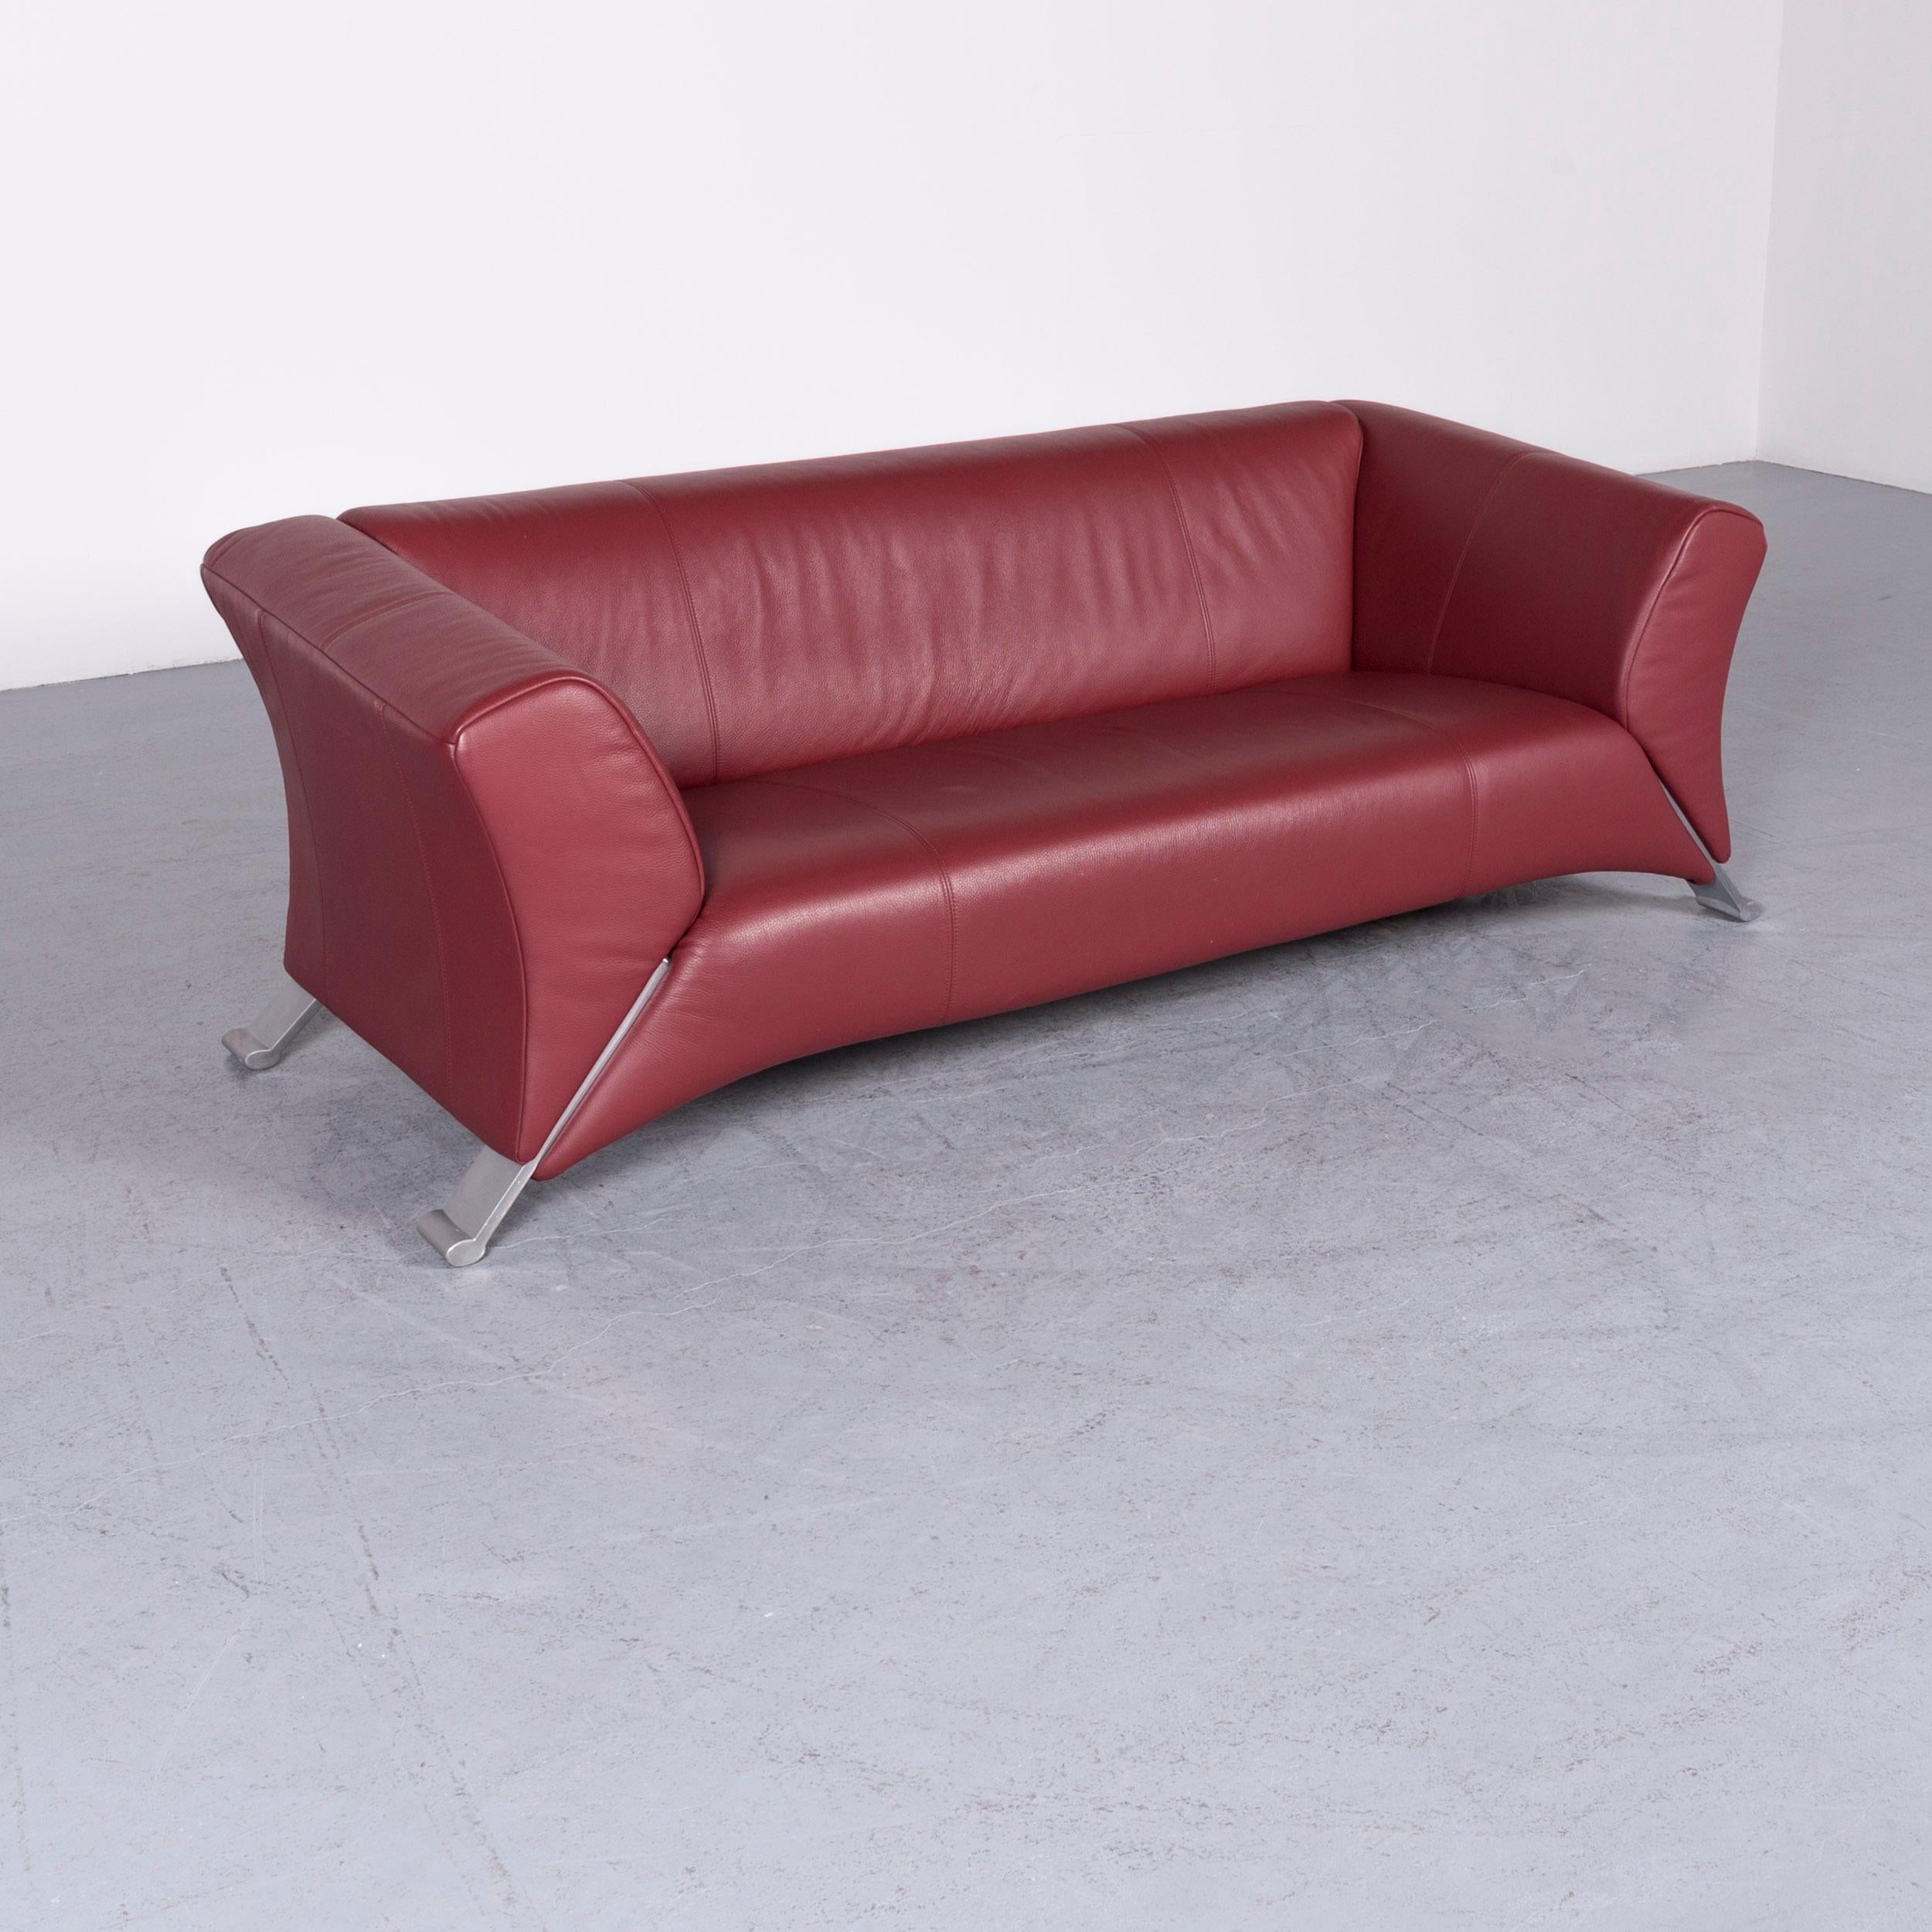 We bring to you a Rolf Benz 322 designer sofa red three-seat leather couch.